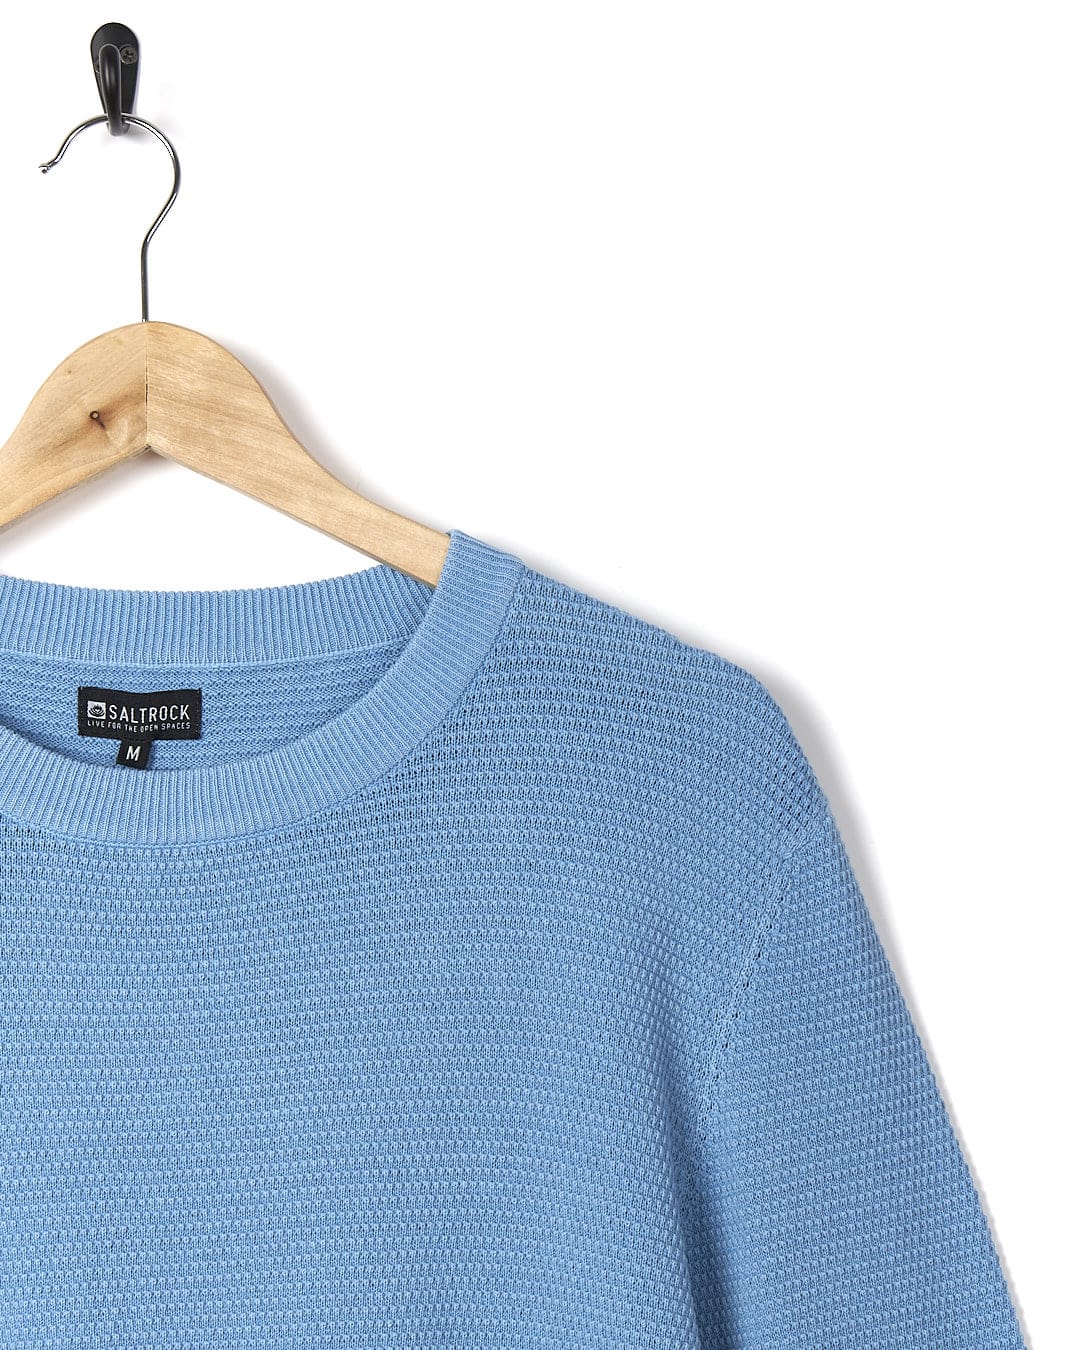 A Saltrock - Moss Mens Washed Knitted Crew - Light Blue sweater hanging on a hanger.